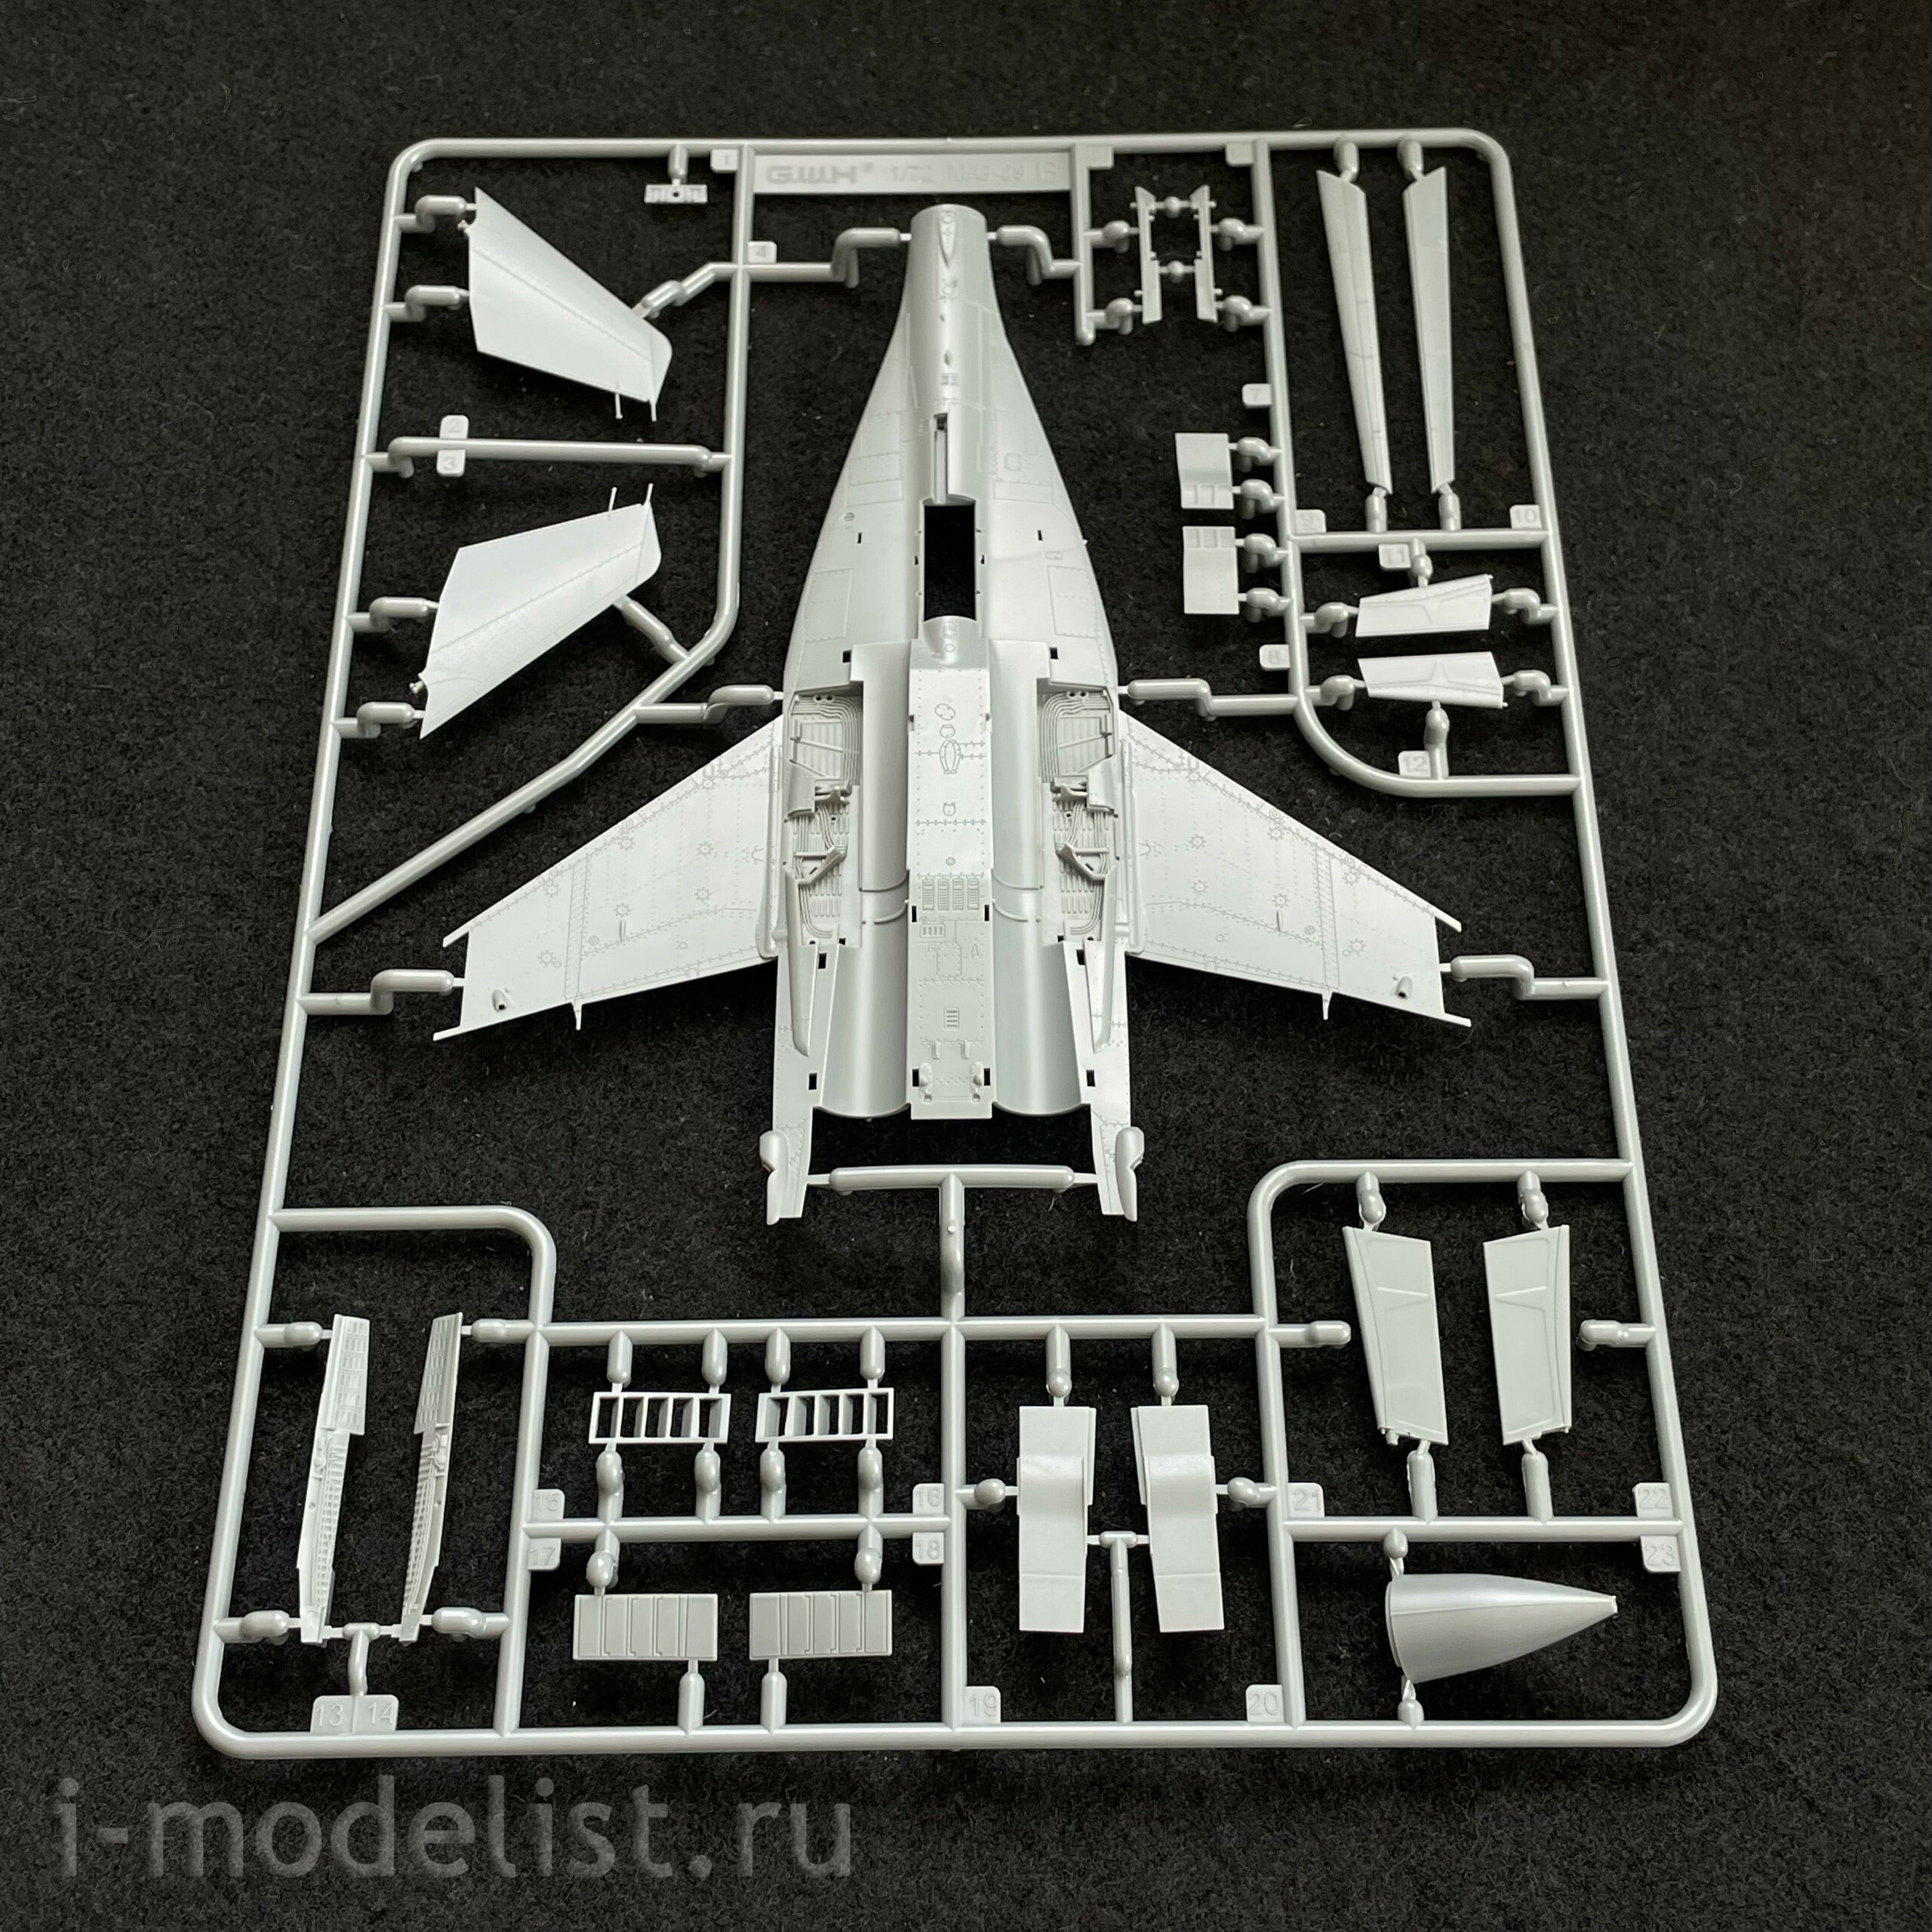 L7212 Great Wall Hobby 1/72 MiGG 29-12 Late Type “Fulcrum” Fighter